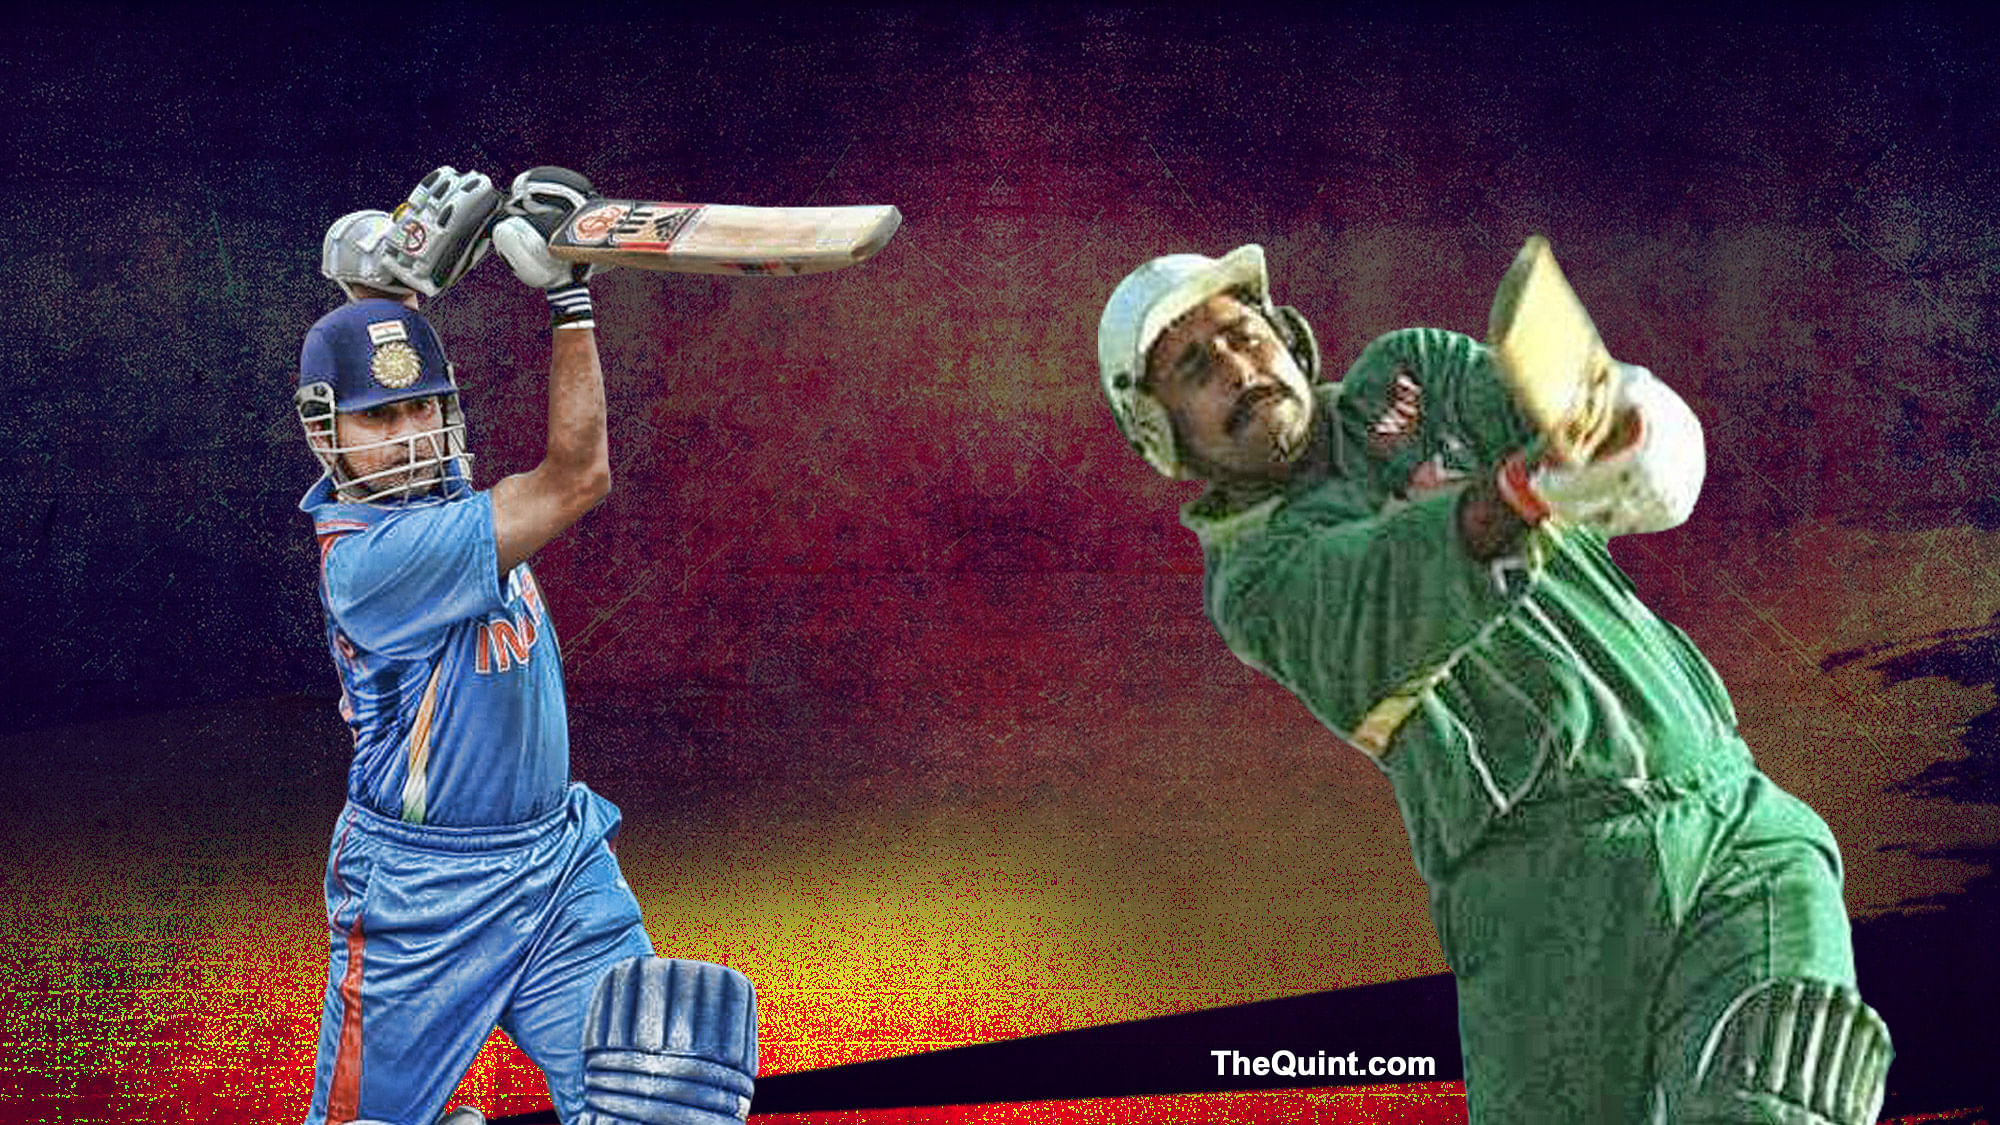 Sachin Tendulkar and Javed Miandad’s sixes change the way we look at India-Pakistan clashes. (Photo: <b>The Quint</b>)